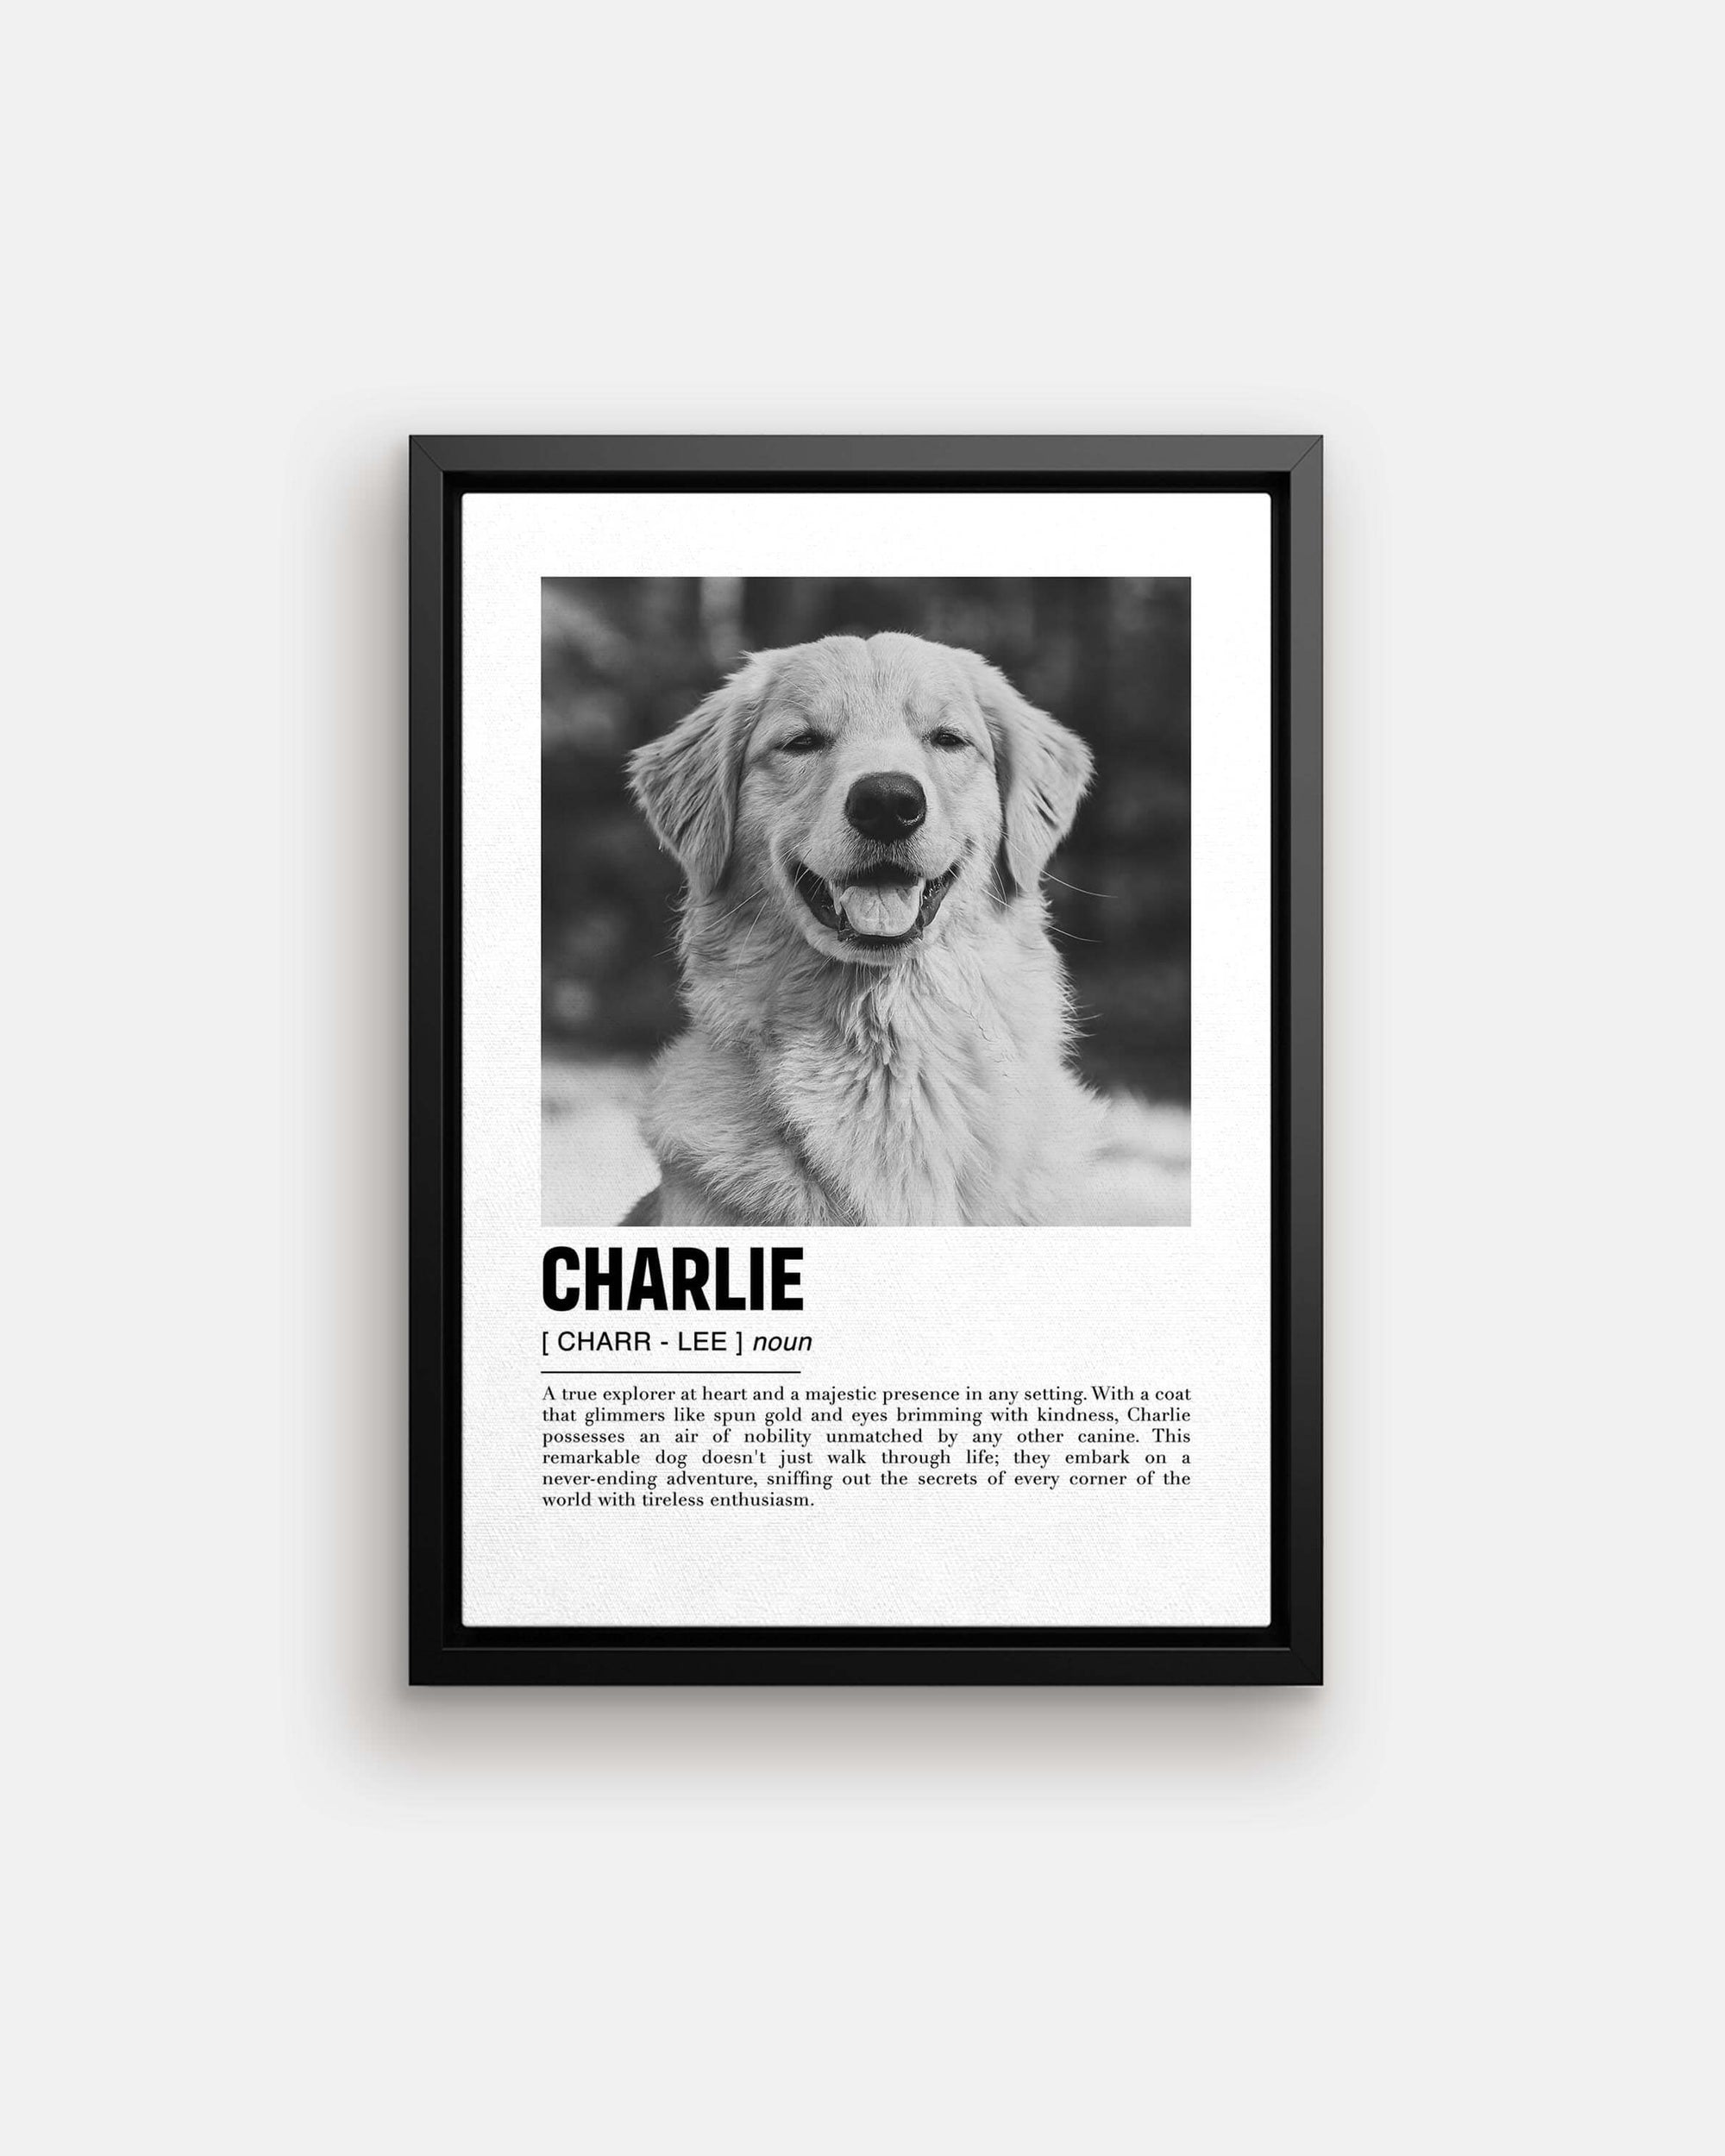 golden retriever dog photo printed onto black floating canvas to make the perfect pet portrait gift idea for dog mom and dog dad pet parents made by vogue paws pet art on demand